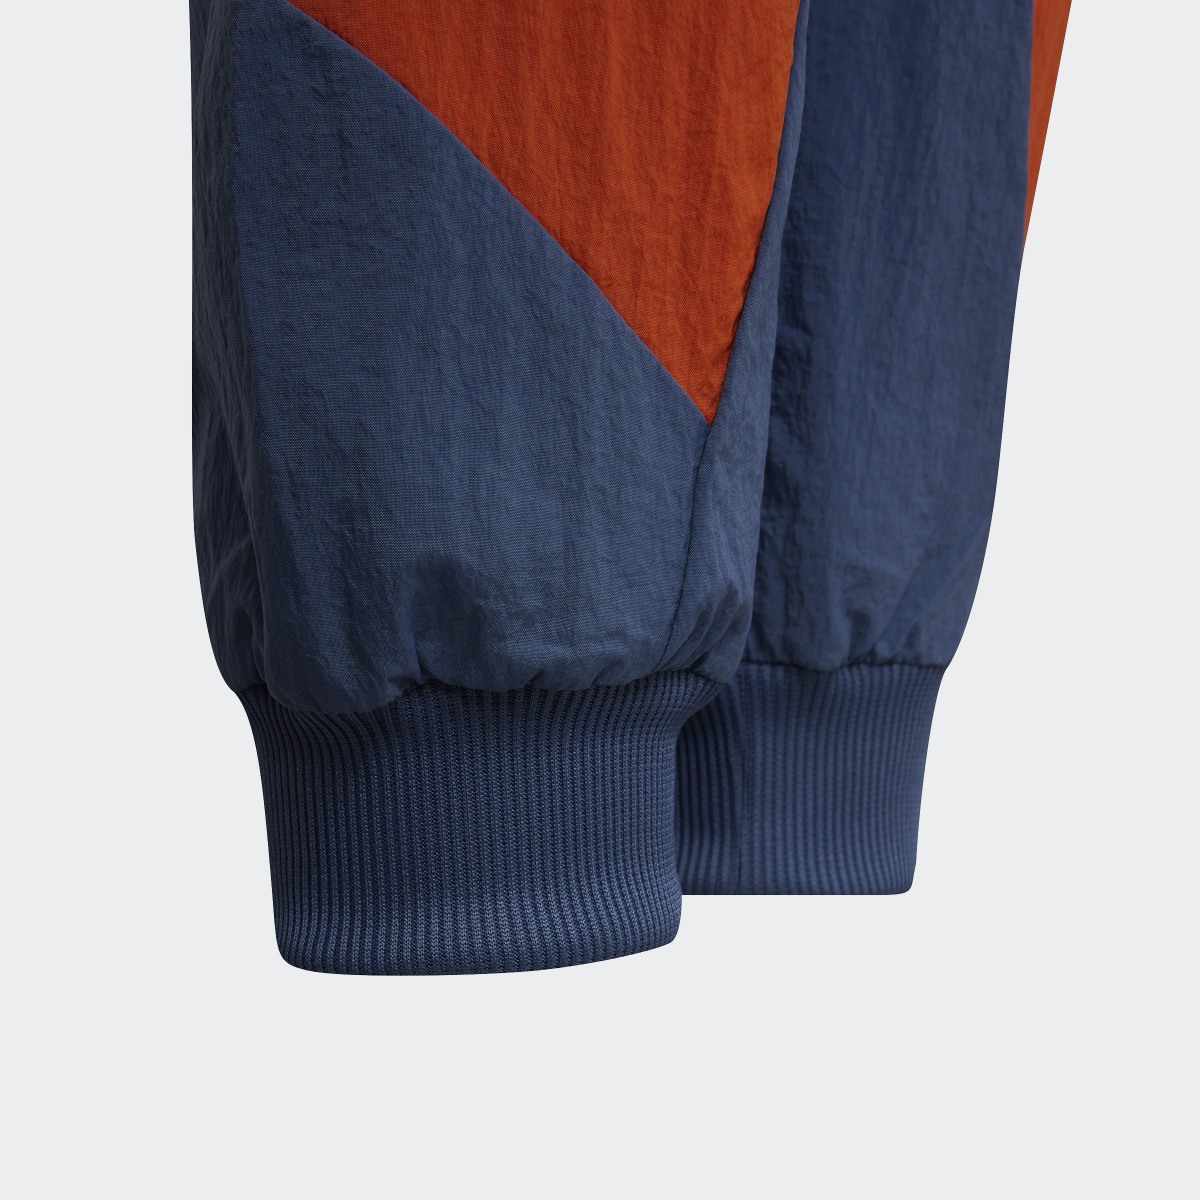 Adidas Colorblock Woven Tracksuit Bottoms. 5